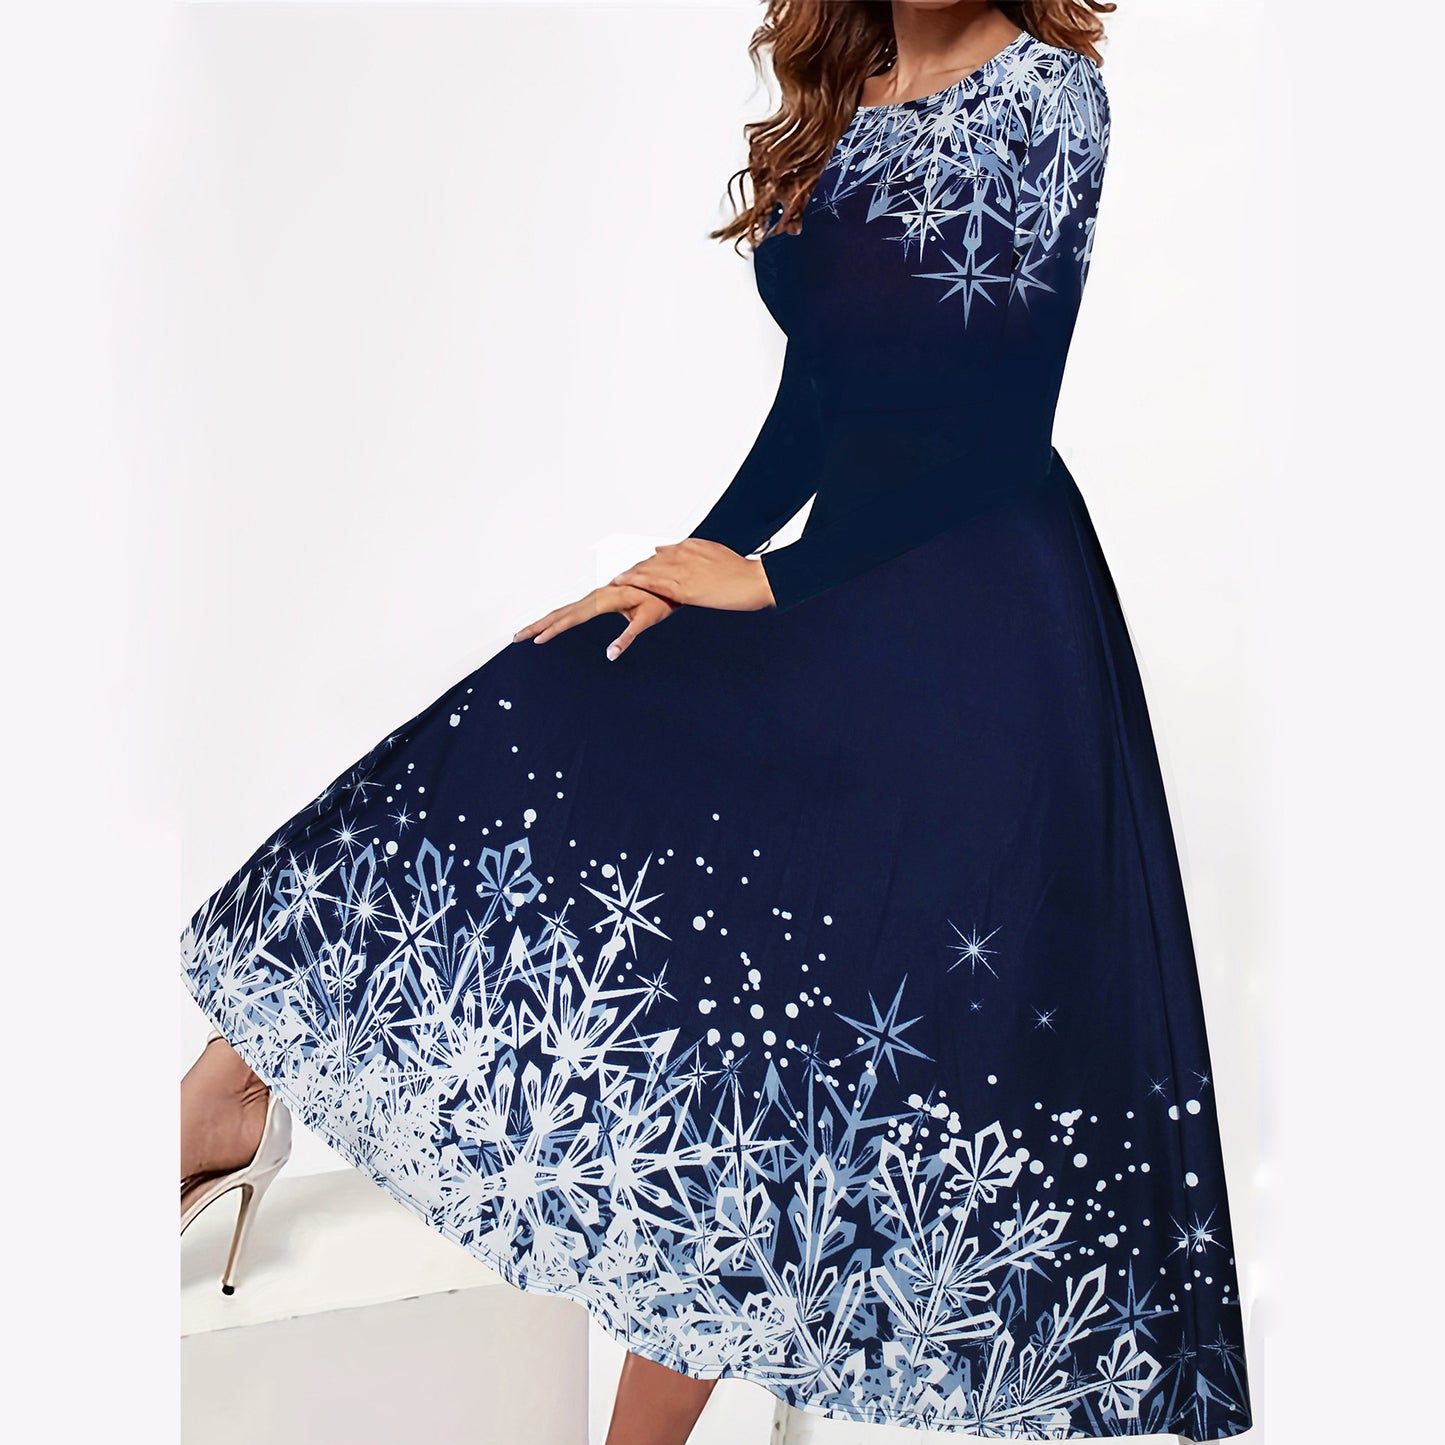 BamBam Autumn And Winter Christmas Snowflake Print Round Neck A-Line Swing Dress For Women - BamBam